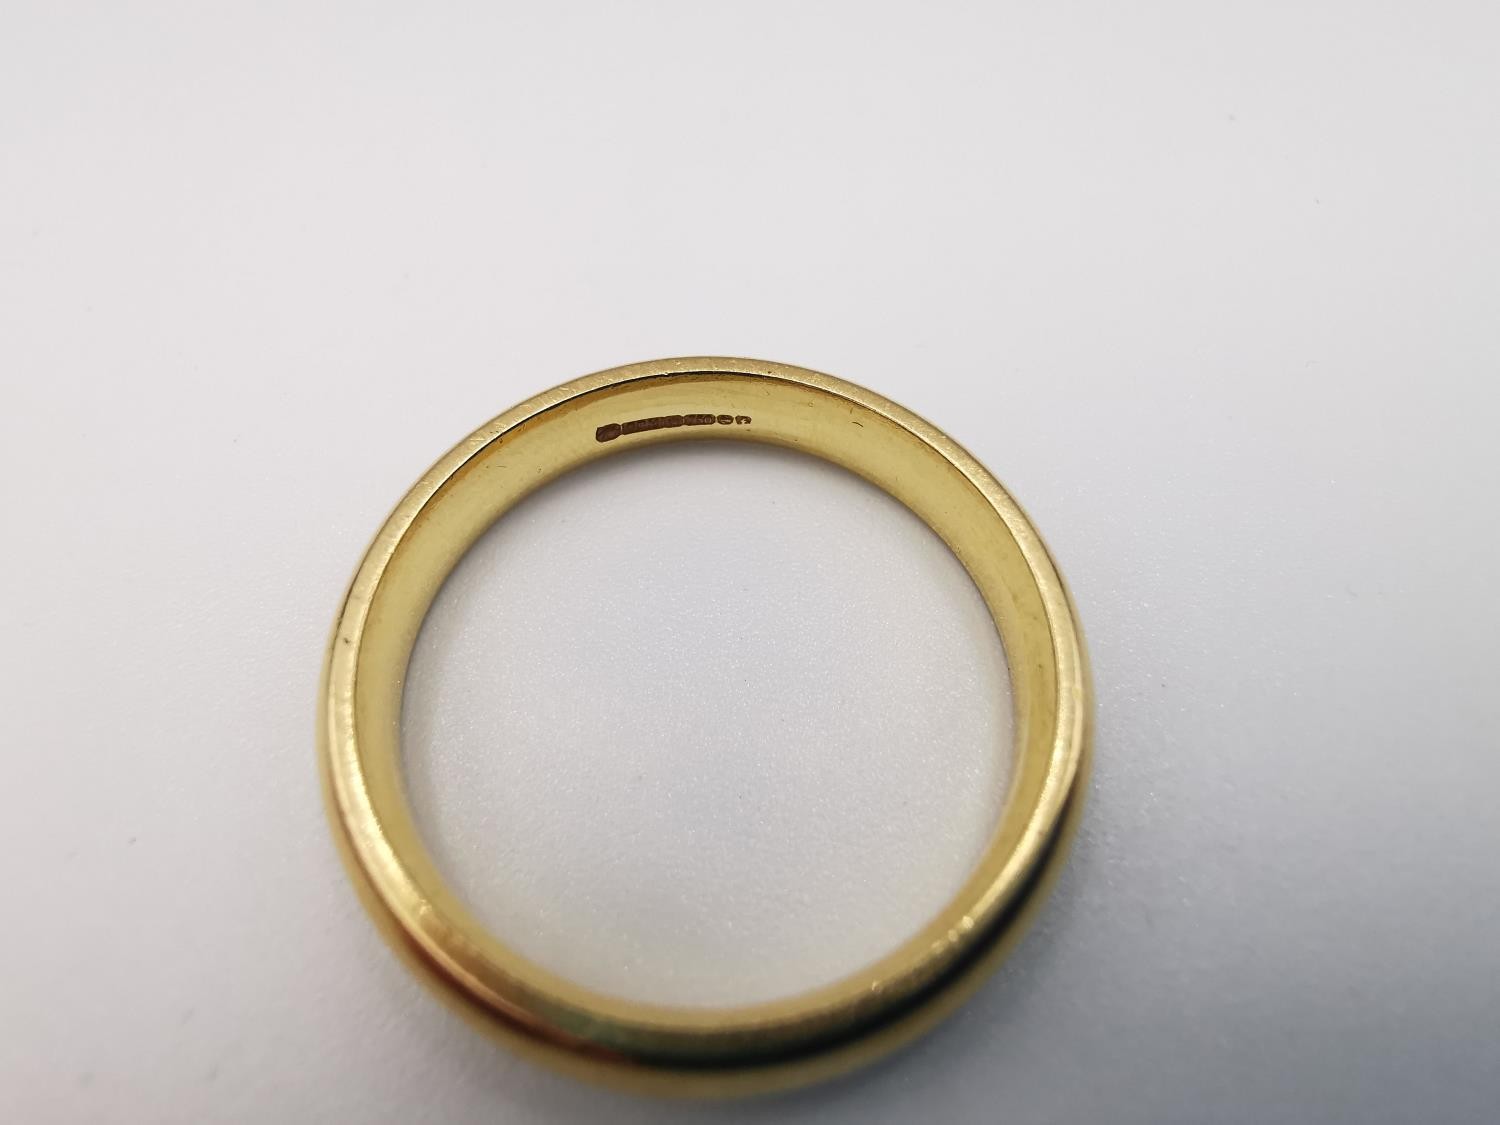 An 18ct yellow gold court shape band. Hallmarked: CPM, Birmingham, 750, 2005. Ring size V. Weight - Image 3 of 3